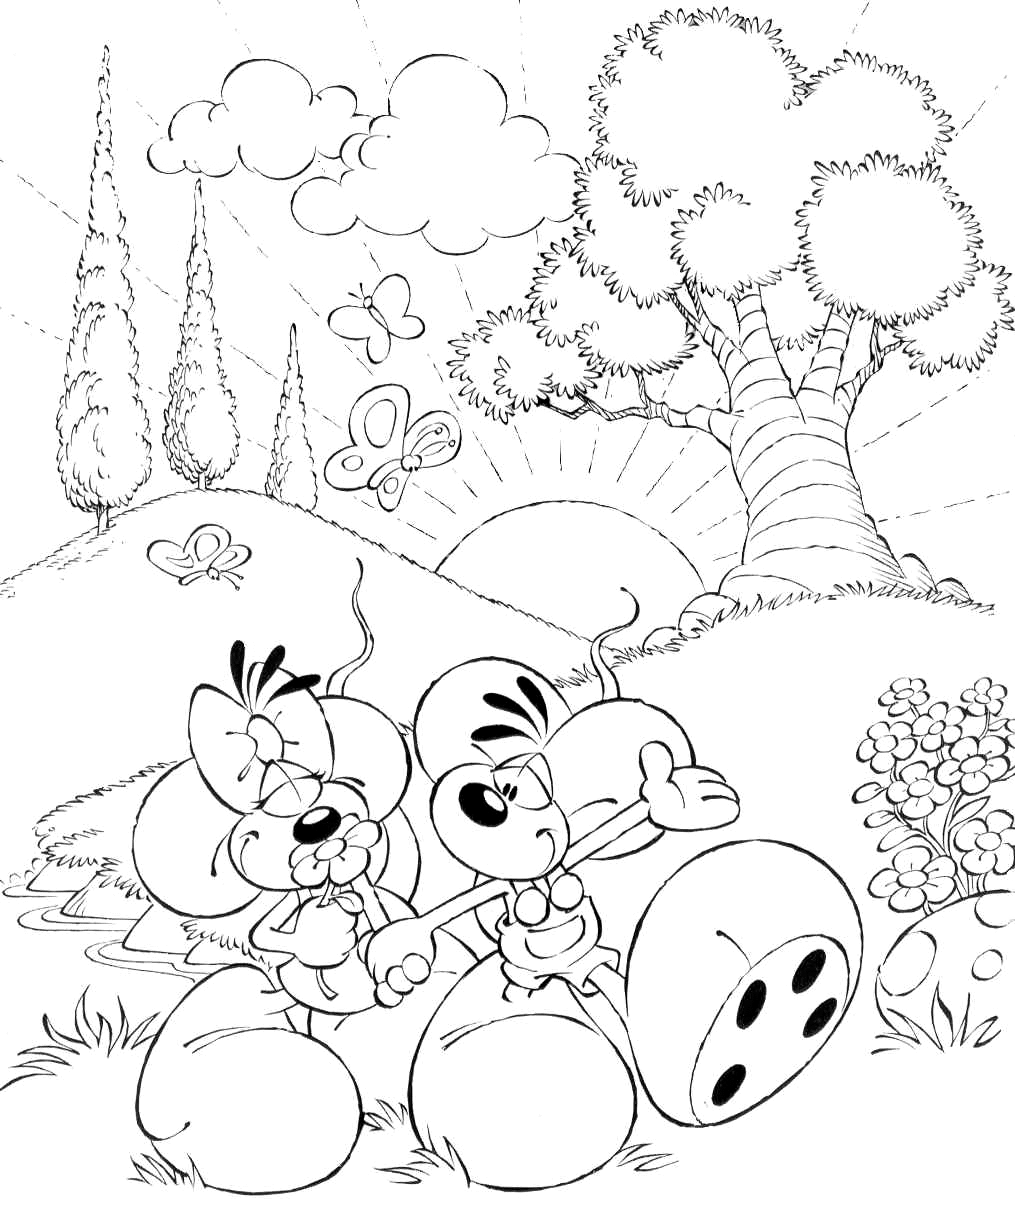 Kids-n-fun.com | 16 coloring pages of Diddl